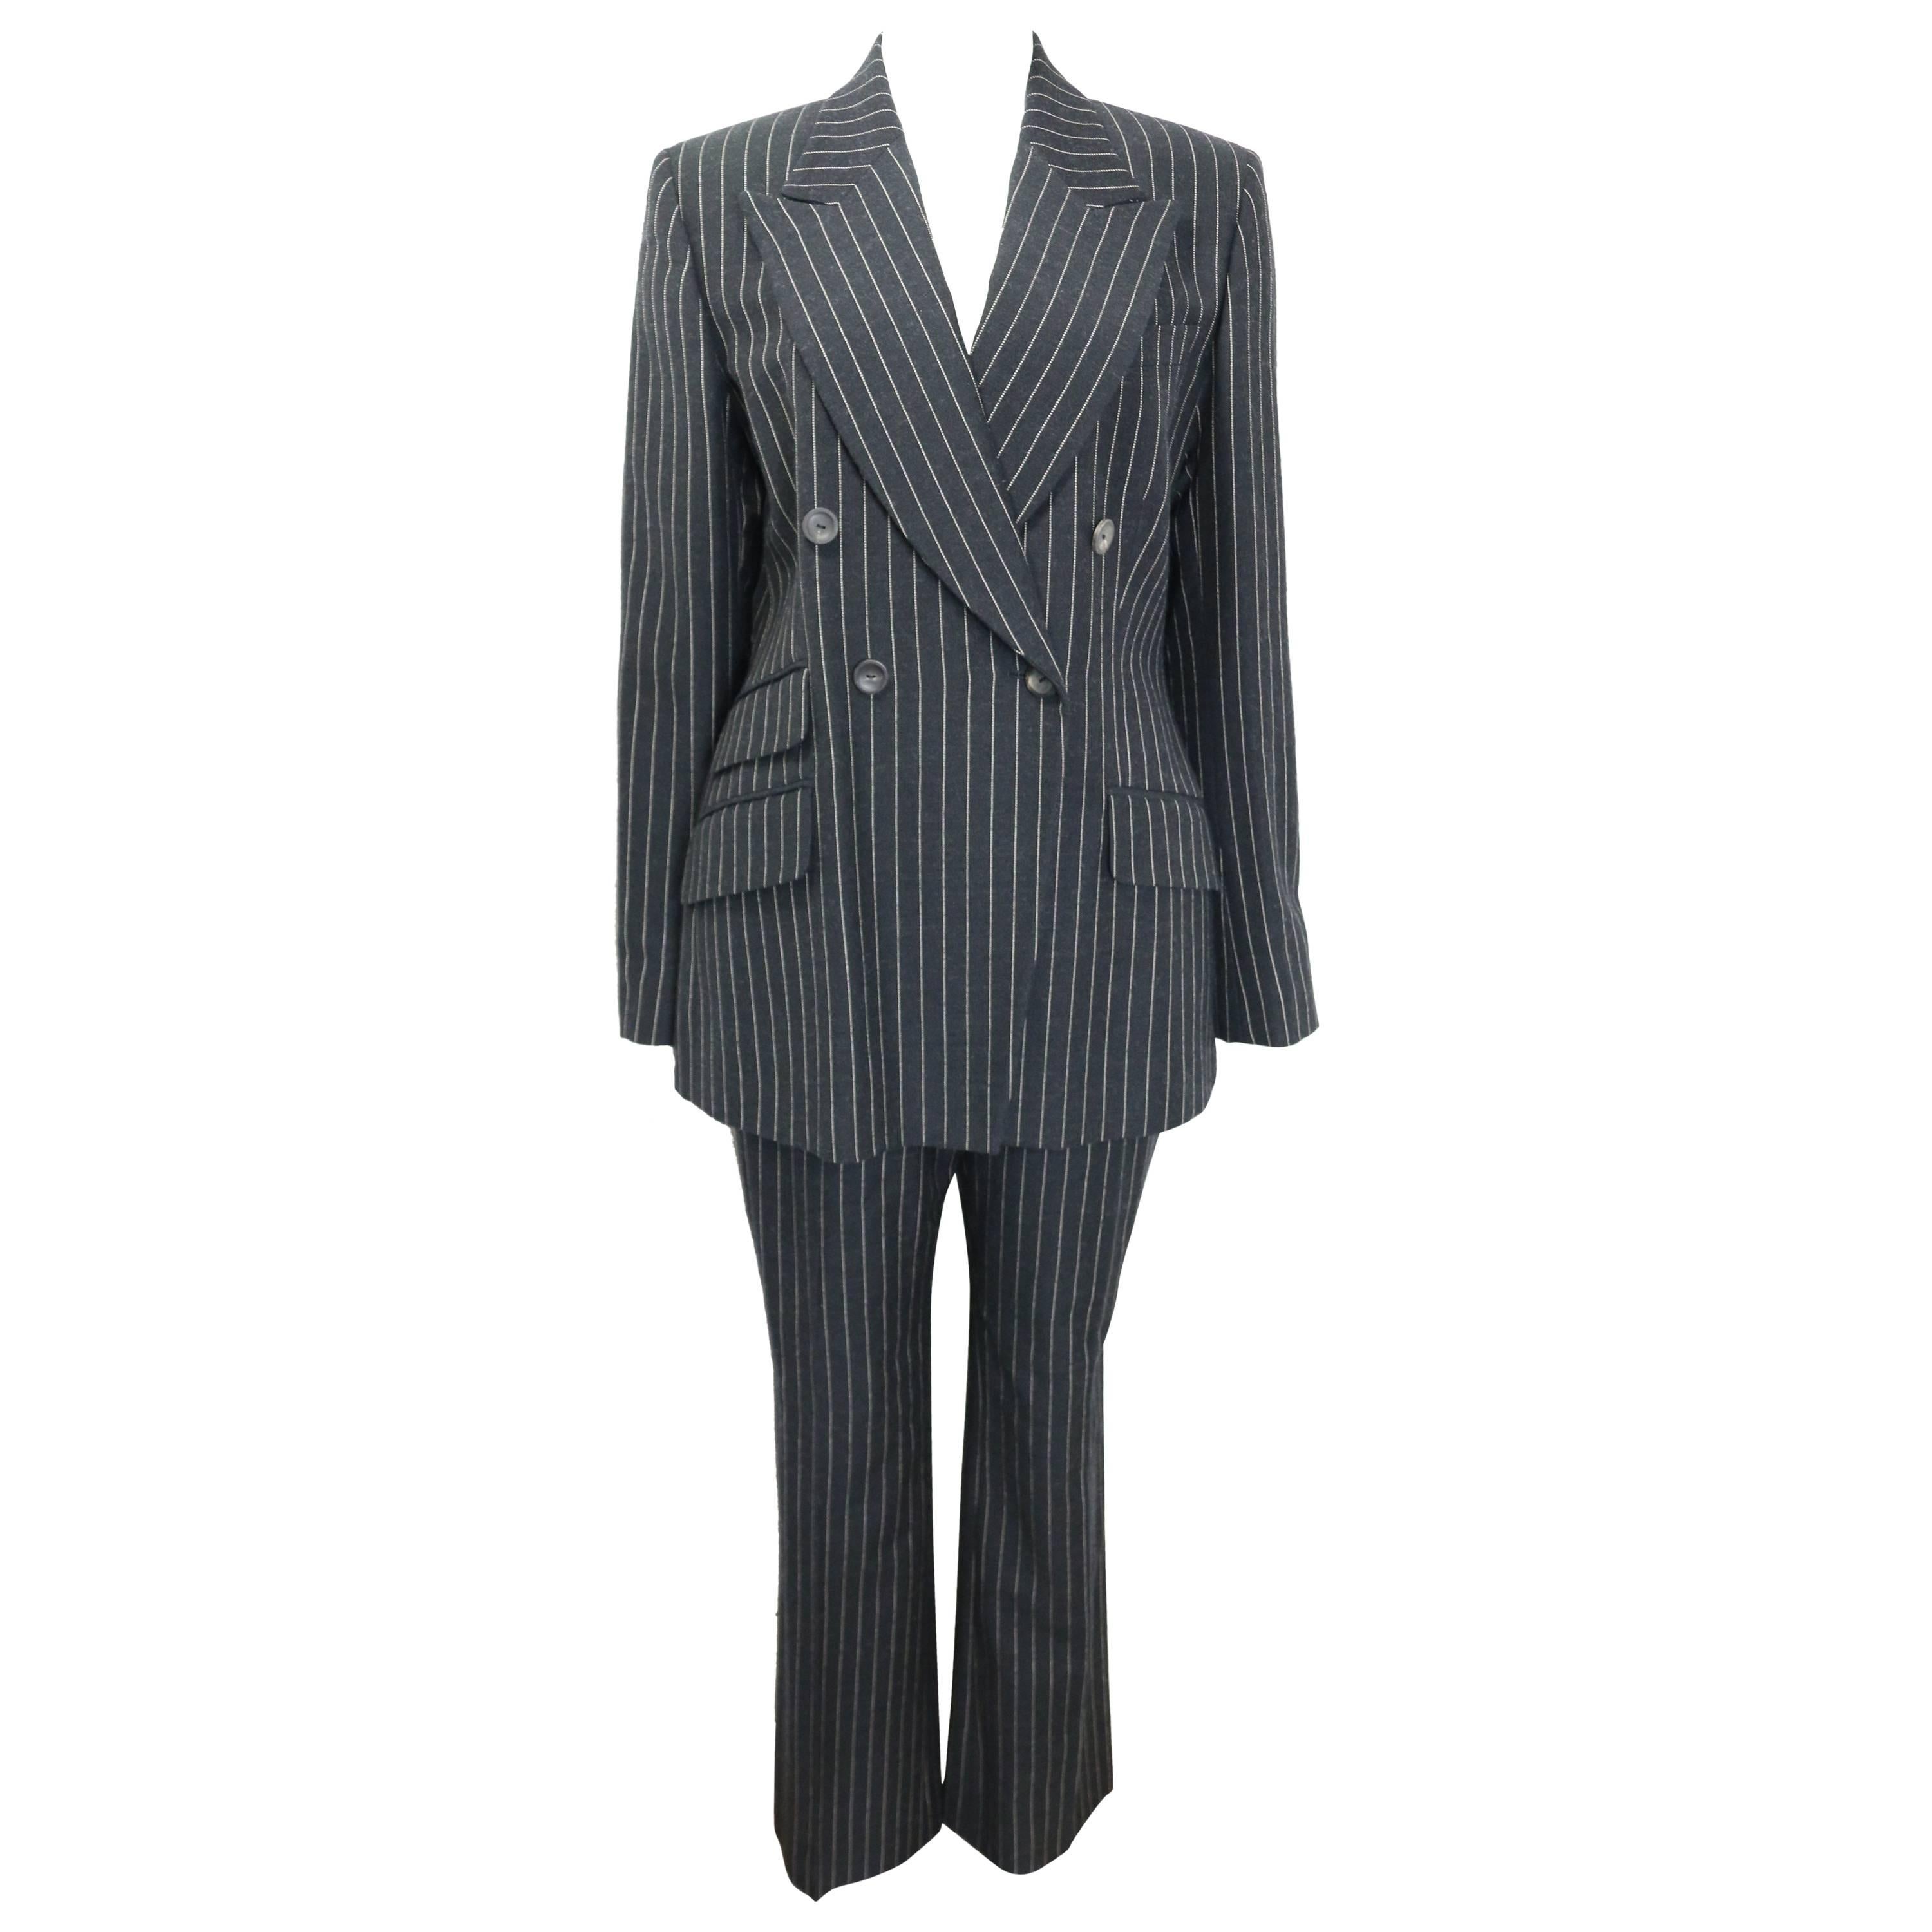 Gucci by Tom Ford Black and White Pinstripe Wool Double Breasted Pants Suit 